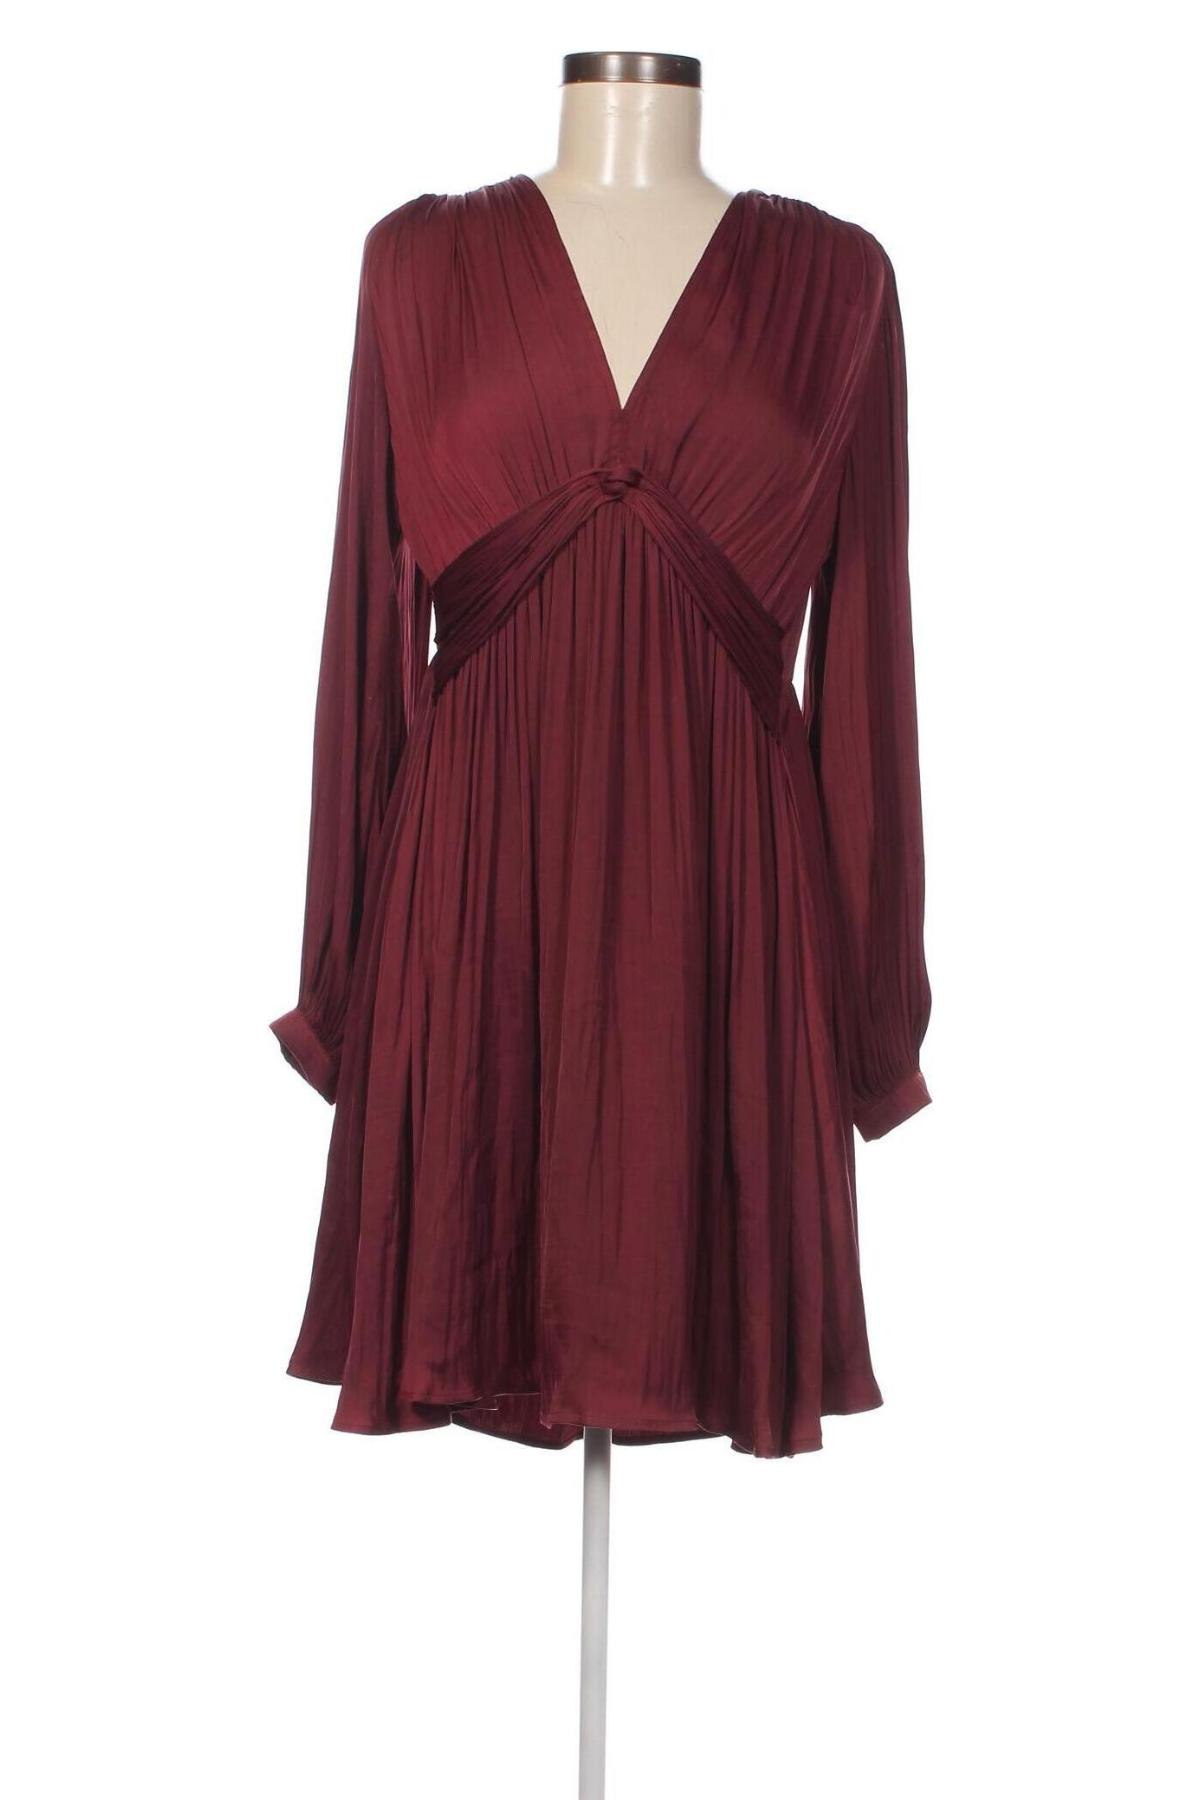 Kleid Guido Maria Kretschmer for About You, Größe M, Farbe Rot, Preis 68,04 €